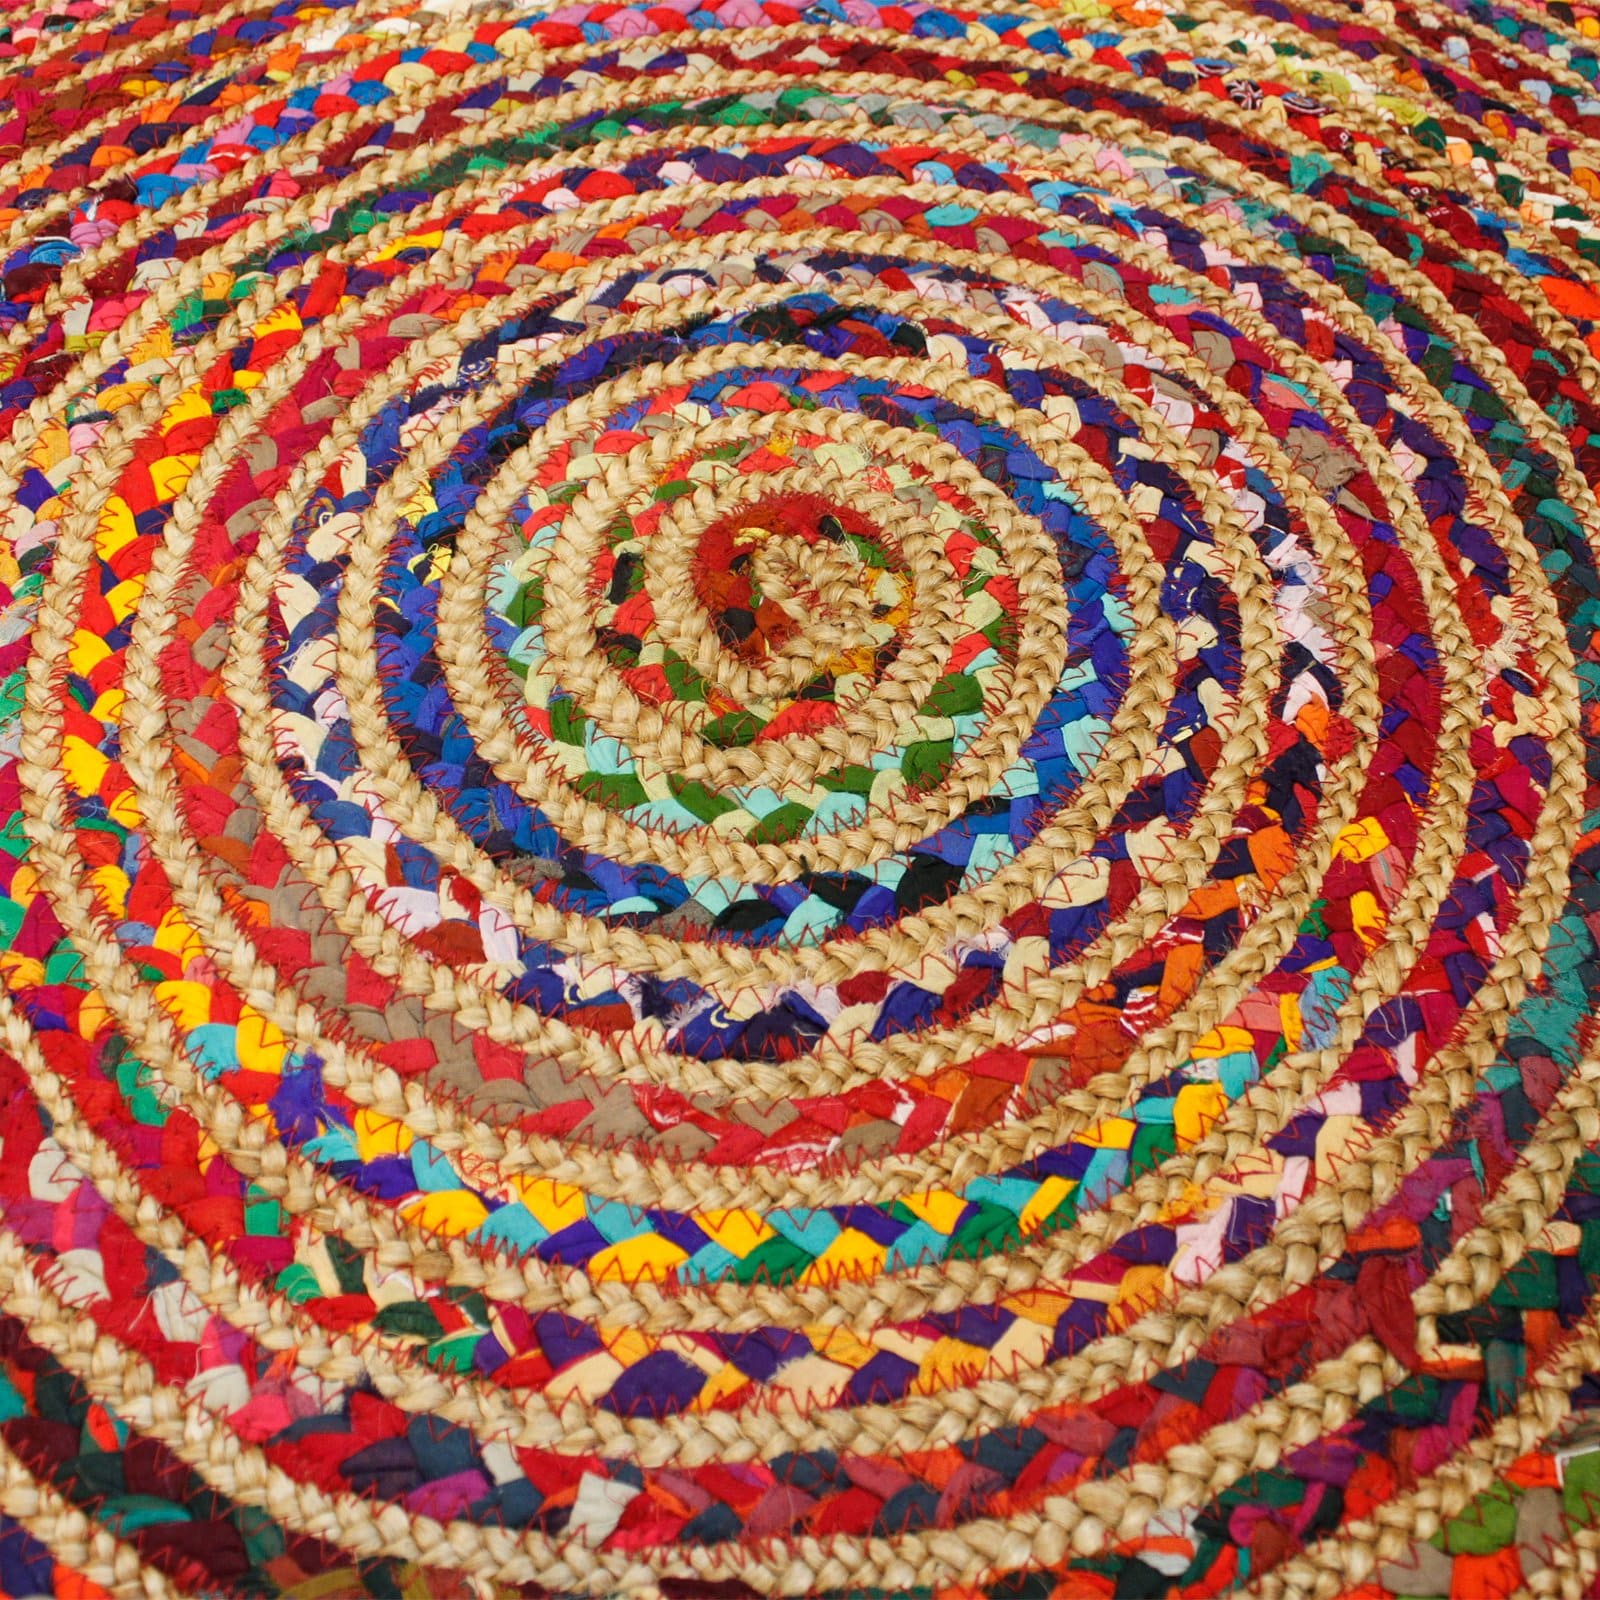 Round Jute and Recycled Cotton Rugs - 90 cm - ShopGreenToday